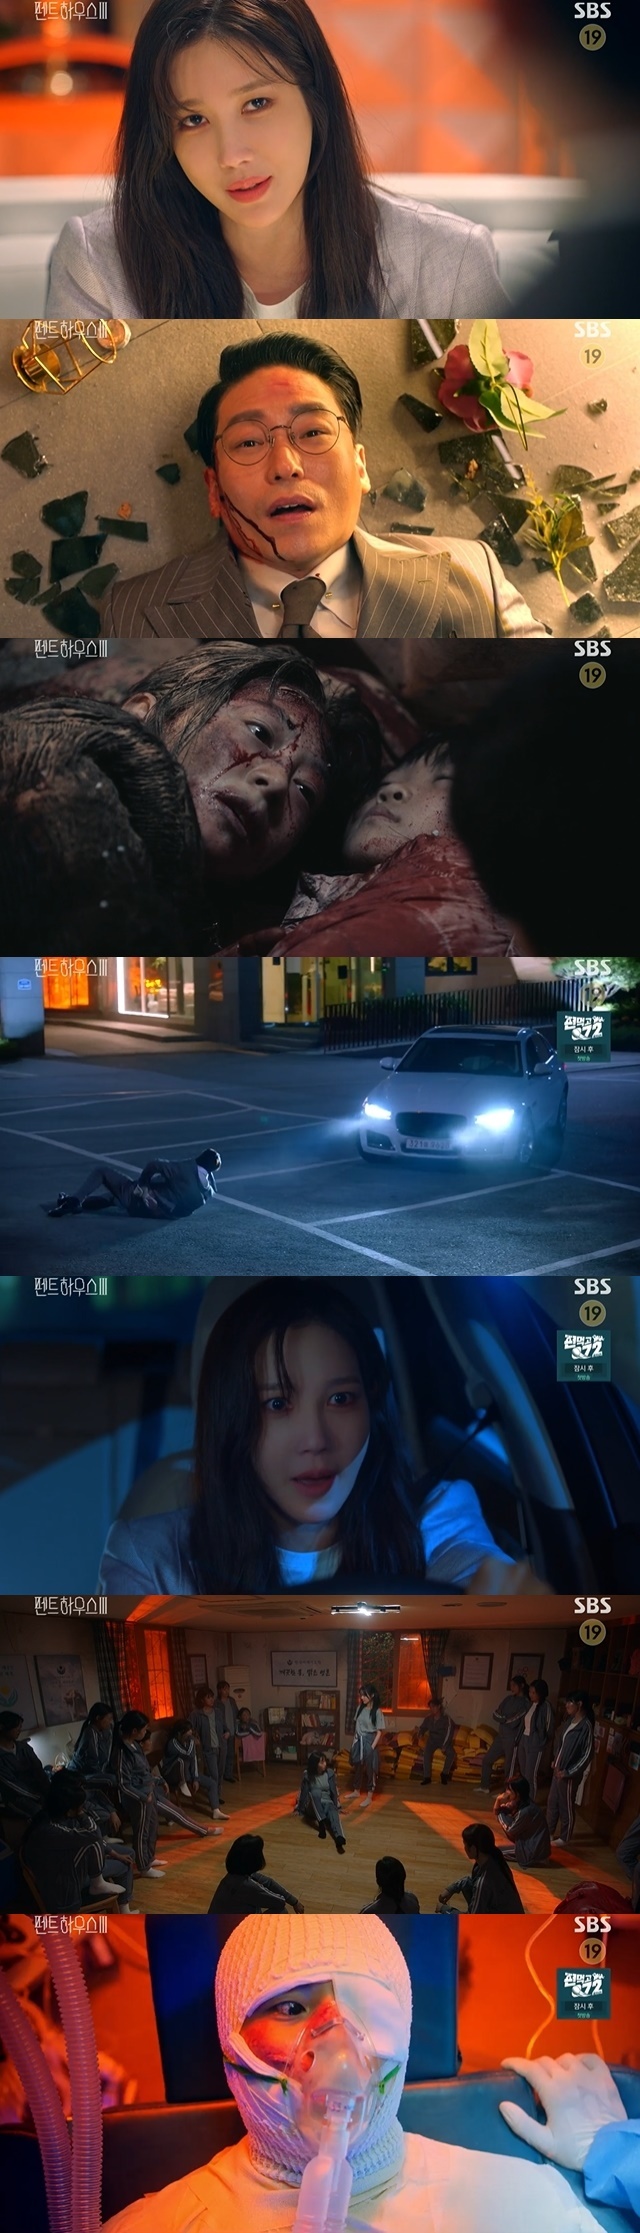 = Shocking to know your biological daughter...Park Eun-suk woke upLee Ji-ah is a han ji-hyunI found out that this was my own daughter: Park Eun-suk woke up miraculously with the help of Yoon Jong-hoon.In the 7th episode of SBS Friday drama Penthouse (played by Kim Soon-ok, directed by Ju Dong-min), which was broadcast on July 16, the figure of Shim Soo-ryun (Lee Ji-ah), who plays a back-to-back operation to prevent the development of Chun Suji-gu of Cheong-a Construction, was portrayed.Shim Soo-ryun and Kang Ma-ri (Shin Eun-kyung) met with the Deputy Minister of Education (Bae Hae-sun) and showed the lobbying scene of Ju Dan-tae (Um Ki-jun) taking place in the room next to Baro.In the CCTV, Ju Tae-tae met with the Minister of Education and said, Please try hard to get the 8th school district to enter the Suji-gu.Please prevent the Gangnam 8th school district schools from being transferred to Chun Suji-gu, Shim said to the deputy minister of education, who asked about the intention to show the video.Shim said, There is nothing to tarnish the vice ministers hand, and asked him to clean up after he would burst everything.In addition to this, Shim Soo-ryun and Kang-mai met with an architect who was a member of the company and broke the contract with Blackmail – Cinémix Par Chloé.And these two were rumored to be the Construction lobbyist with beautiful beauty on the side of the main body and the bodyguard Jessica who guarded her.Yoon Chul Ha (Yoon Jong-hoon), who was treating Logan Lee (Park Eun-suk) after receiving Blackmail – Cinémix Par Chloé to Chun Seo-jin (Kim So-yeon), disguised as a suspicious voice, wanted to inform the training.However, Chun Seo-jin was horrified by showing his daughter Ha Eun-byeol (Choi Ye-bin)s life in Blackmail - Cinémix Par Chloé to cover Ha Yoon-cheols mouth.Ha Yoon-chul did not even guess that the identity of the suspicious voice was Chun Seo-jin, and doubted the main situation.han ji-hyunBoone) went to Italy by Judantae to study abroad.Joo Seok-hoon (Kim Young-dae) warmly comforted the heart-wrenching mind-training with this, but soon Shim said, I know the mind of Rona (Kim Hyun-soo), but I think it would be better to stop here.Your father is involved in Ronas death. Rona will know someday, and you will be greatly hurt. Joo Seok-hun has condemned himself by saying I am a son of a bitch.Ju Dan-tae showed his malice toward his father.Judantae visited the company of Shim Soo-ryun and said, I will push it all out soon. Penthouse and Suji-gu 27 were called their names.He replied to Shim Soo-ryun, Why do you stick to this place among the many lands?Chun Seo-jin told Ju-tae, who wants to finance the Cheong-a group, to put out 10% of the Cheong-a group stock.I did not like it, but I accepted it and started recruiting members.The main party also attracted attention with its enormous promise to compensate 200% of the sale price if it can not keep any promise.On this day, Shim Soo-ryun made a final blow over the issue of Suji-gu construction company.She turned into a lee ji-ah, and found a police station and said, I found an illegal camera installed in the VIP room of my business.I did not want to get caught up in this, so I came to report Baro. I did not know it was hidden in the ornaments. It was natural for the police to find the corporate entertainment scene of the main group in the camera.Eventually, when the press was loud with the Corporate Entertainment video, it threatened the main stage.So the company is almost bankrupt, and the main situation is I have to take the construction right somehow.If it does not work, I will buy it as a Construction barrel. And he assured the party, Get a meeting with the Constructor representative right now, I will make money. He found a Haeyeon group run by one of the Sammama.He asked the chairman for cash loans here; the chairman offered him a cash check and instead demanded collateral; he demanded a penthouse that the president has as collateral.The reversal was the one that appeared from behind as soon as the main stage was out. In fact, all the money the chairman lent was the money of the cardio.Then, Shim Soo-ryun showed up at the Doha Construction meeting and said, I am the Doha Construction lobbyist you were looking for so hard.Judantae was blackmail – Cinémix Par Chloé, but it did not work.The heart was not sick, but the sickness was blown away by the sickness, and the sickness that saw the blood fell.The young Judantae, who had lived in the redevelopment zone in the past, woke up to the sound of a forklift that had been pushed in while sleeping and tried to protect his house and family.However, the driver of the forklift pushed to the barracks without hearing that my mother and my brother are sleeping.This was a secret to the chairman of the Construction, but he did not know the master. After that, he found a dying mother in a pile of house stones.My mother died leaving a will to Judantae, Live as a Rich Man: 27 Suji-gu, where Baro Judantae was so obsessed.After that, her hands were tied. She threatened this state with a car. She shouted, Speak of what you killed Yoon Hee. Admit to killing Logan.However, the situation before the death of Judan Tae almost occurred, and the reversal of the appearance of Joo Hoon appeared to save him.Joo Hoon said, What the hell do you do, and my mother does that? And he showed his acceptance of the proposal to come under him.Afterward, Joo Seok-hoon pushed her away, pretending not to know when he saw her.Joo Seok-hoon told Bae Rona, Lets break up, and said, I will not pretend to know you in the future and I will not find anything.Its not your fault, we cant choose who our parents are, so you can put down a heavy load, Bae said.Joo Seok-hun only conveyed his sorry heart to himself.Bae, Shim, was informed by the police that he had found a clock that Oh Yoon-hee (played by Eugene) was wearing just before his death; Shim had restored the recorder in the clock, and in it, My sisters daughter is alive.The last truth was that Seok Kyung-i was a twin (Jo Soo-min) and was dragged into a suspicious place, not Italy, by Ju Dan-tae.Joo Seok-gyeong was beaten in a group here.